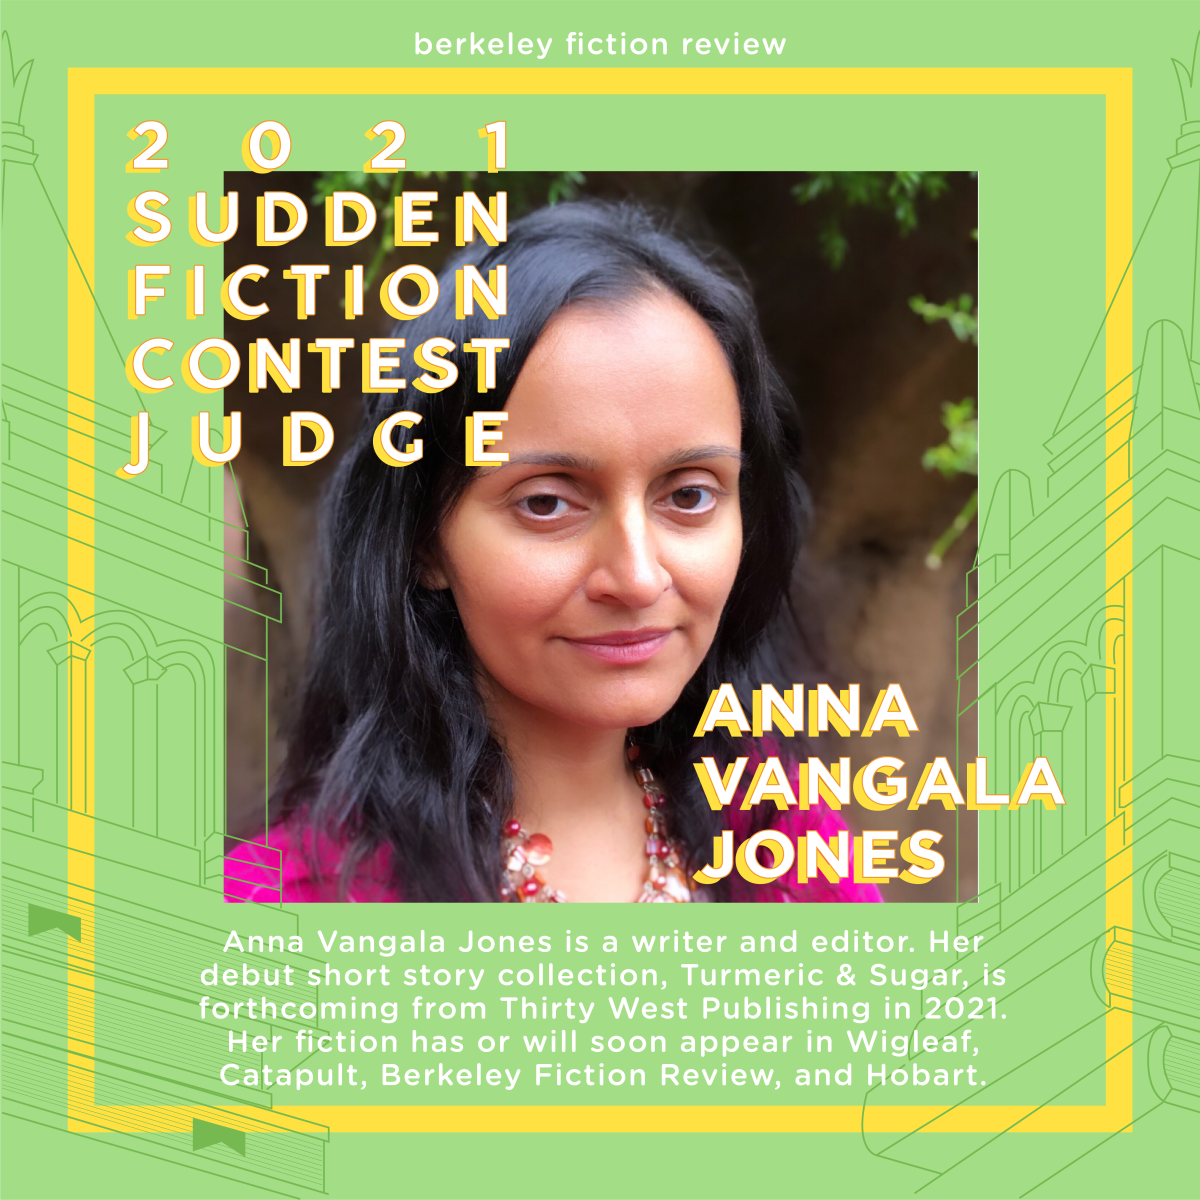 A Case for “the surreal and the strange”: Interview with Anna Vangala Jones, Sudden Fiction Guest Judge and Author of Turmeric & Sugar